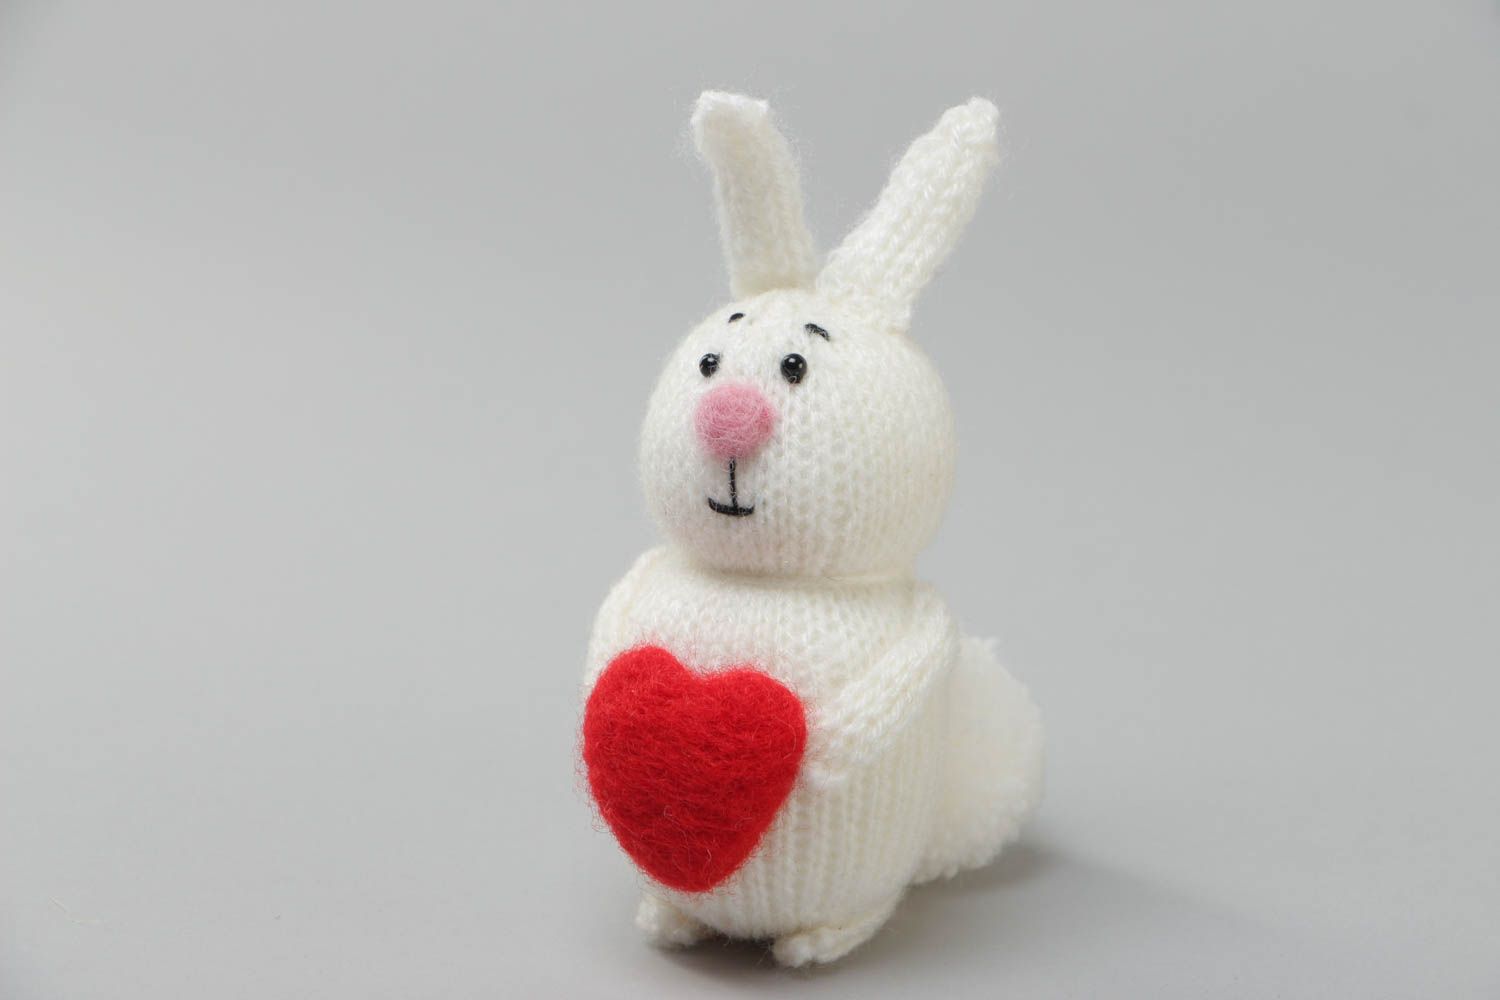 Handmade small soft toy knitted of acrylic threads white rabbit with red heart photo 2